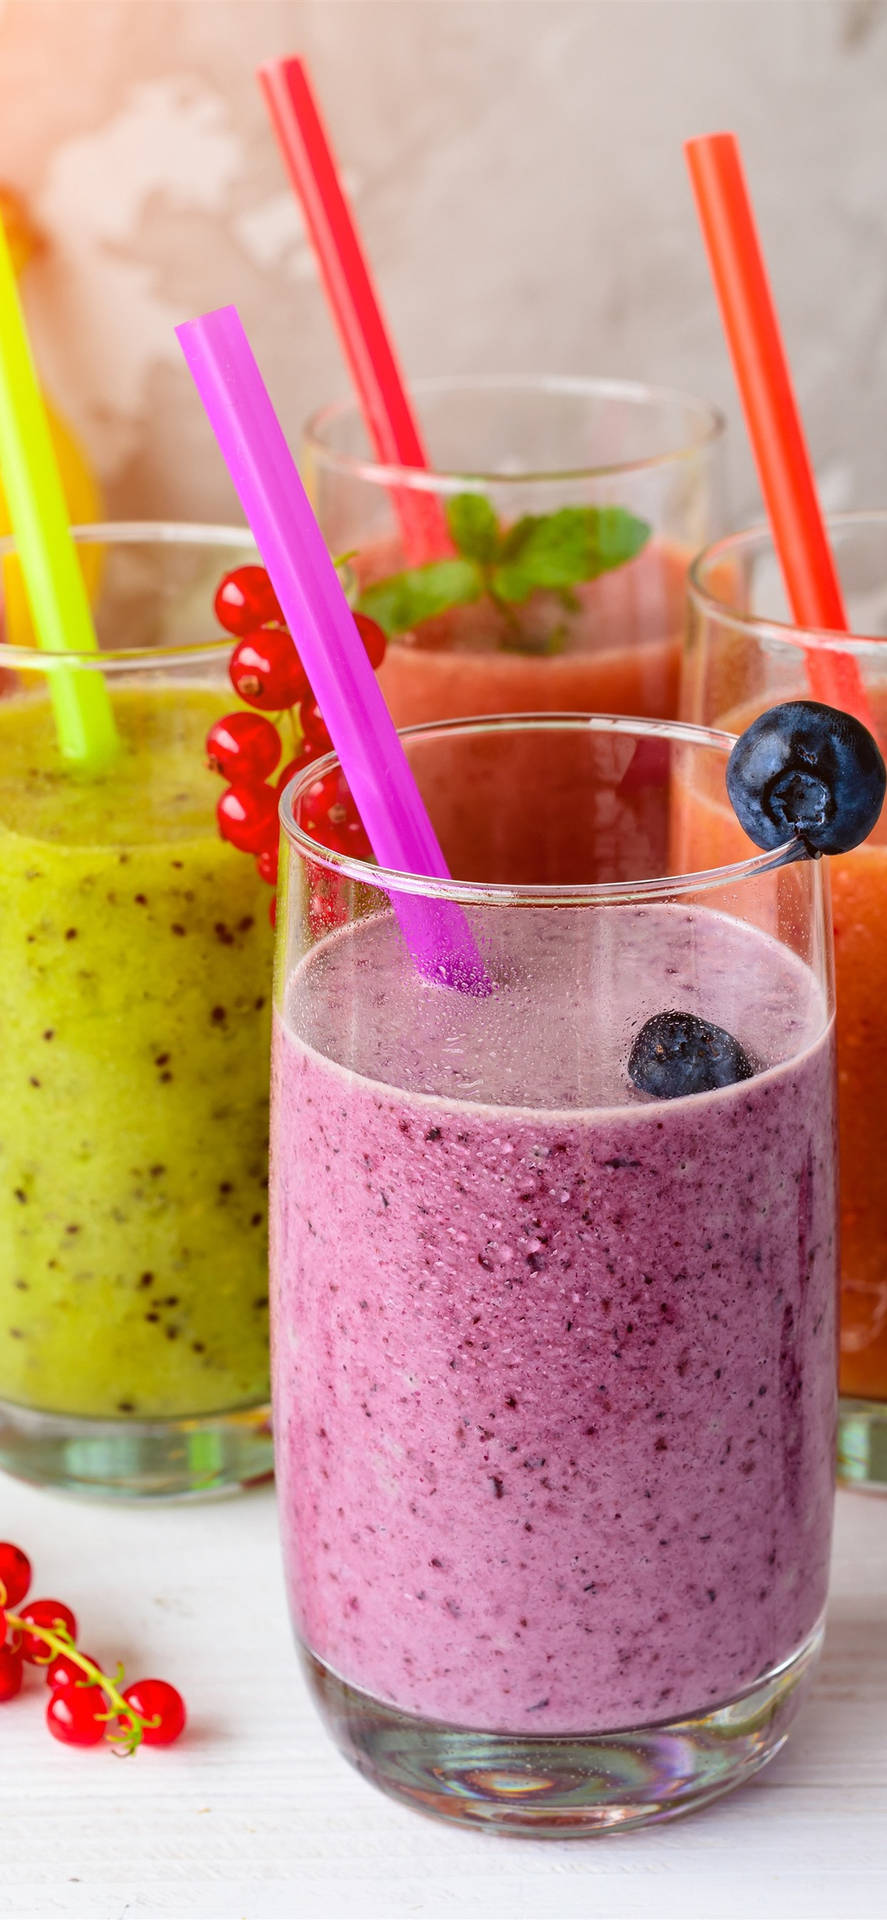 Vibrant Smoothie Delight Background